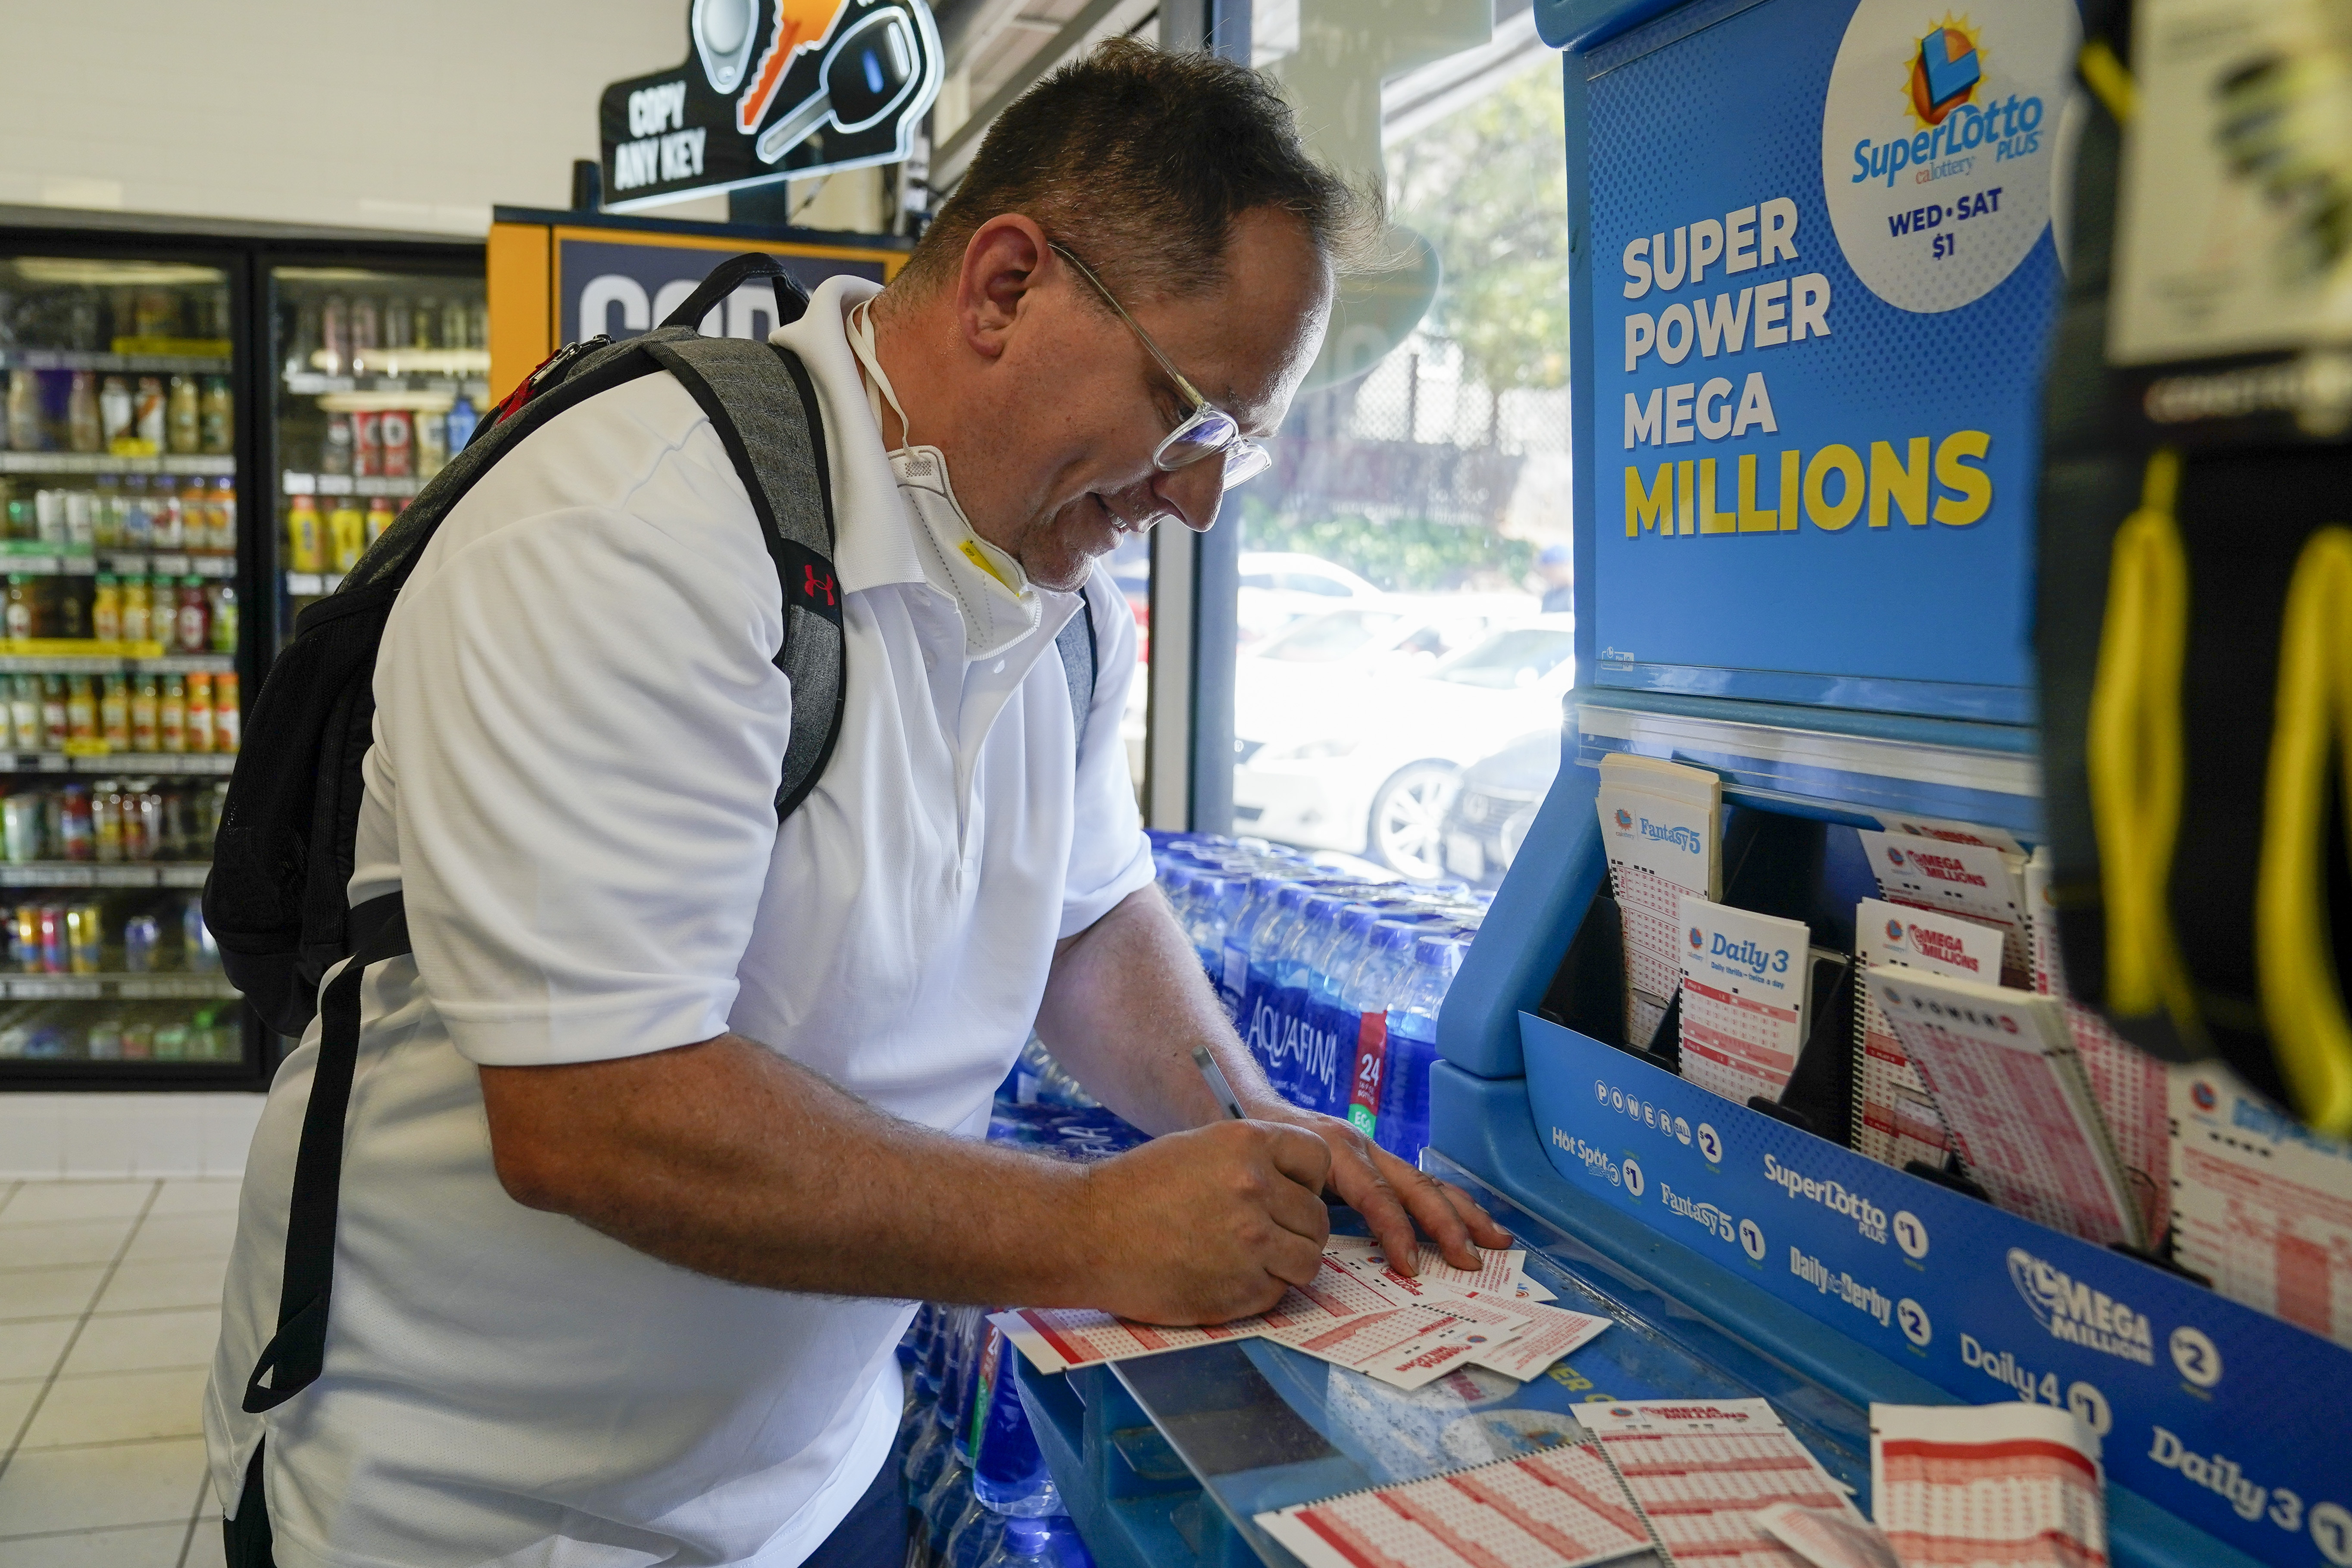 The lottery is played in 45 states and three territories of the country (AP Photo/Godofredo A. Vásquez)